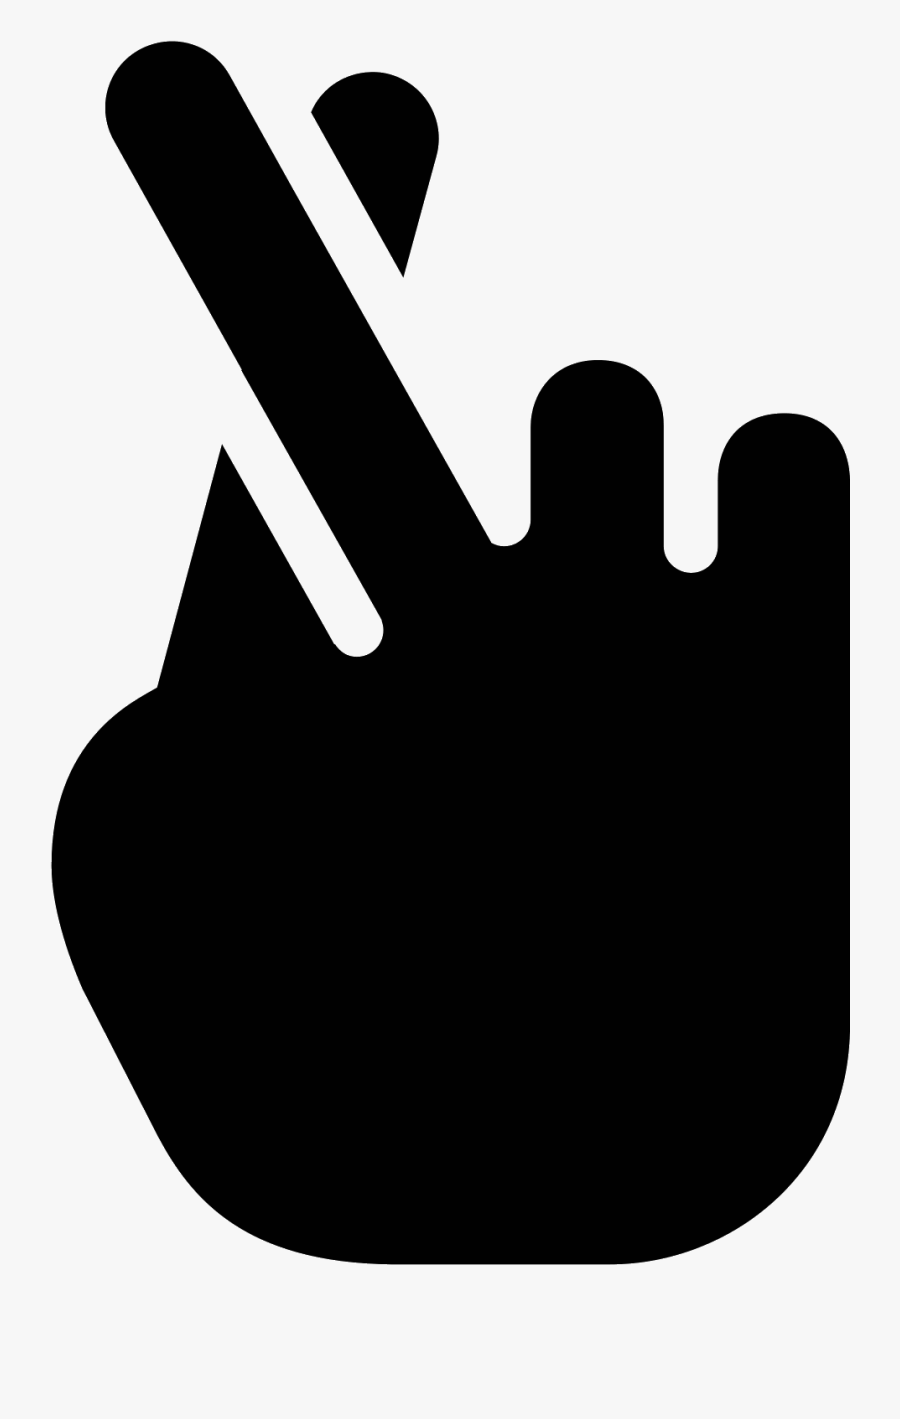 Hand Clipart Vector - Fingers Crossed Black Png, Transparent Clipart